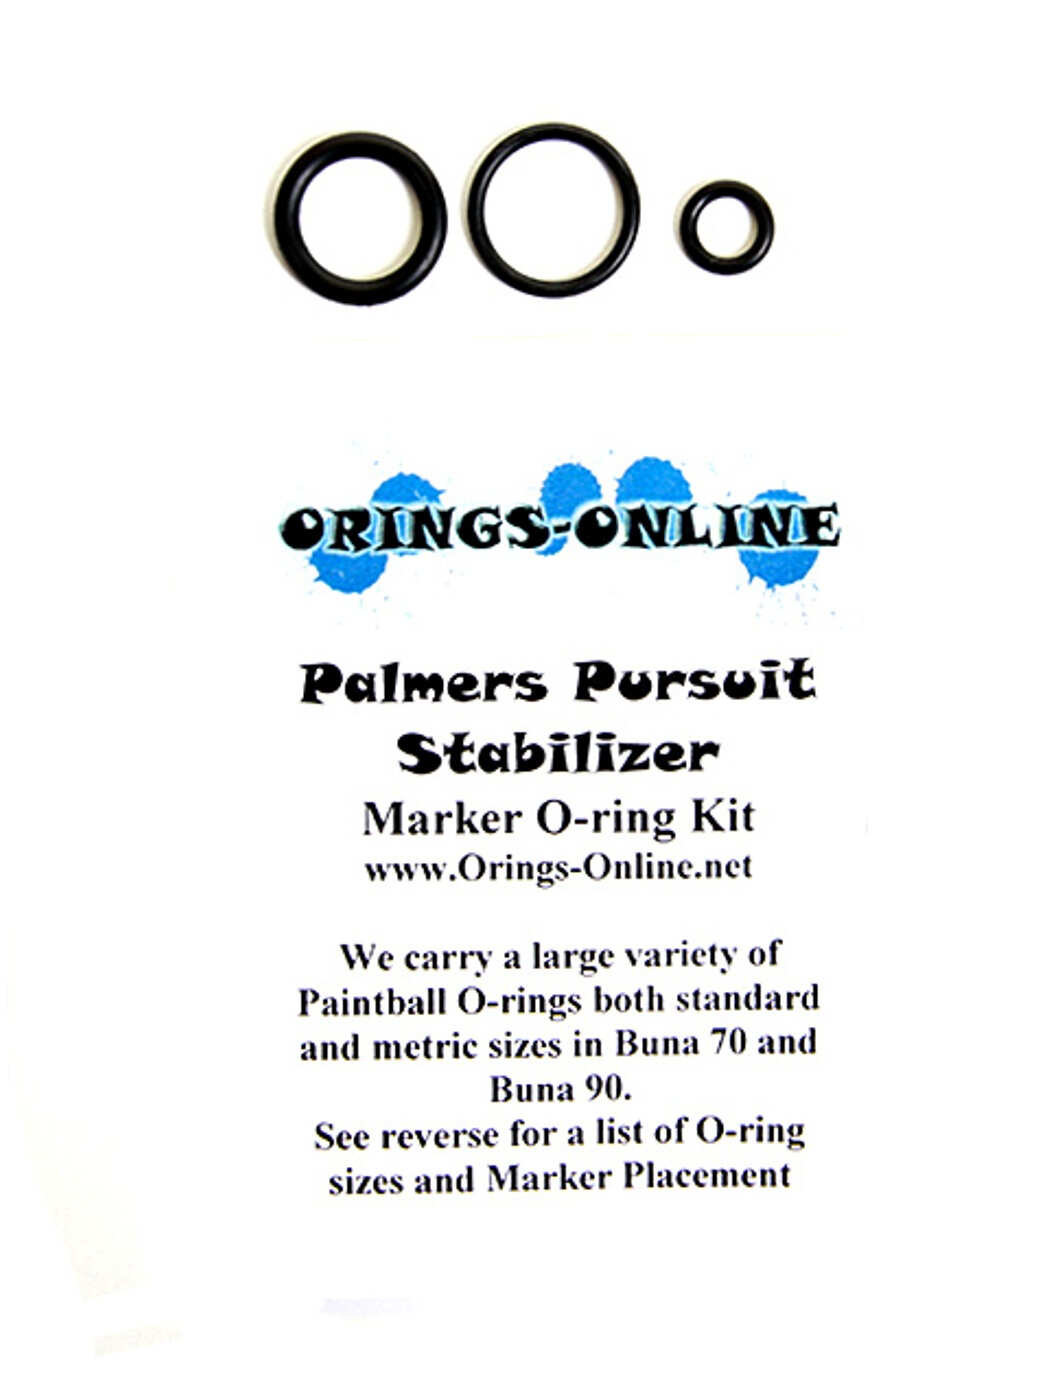 Palmers Pursuit Stabilizer O-ring Kit